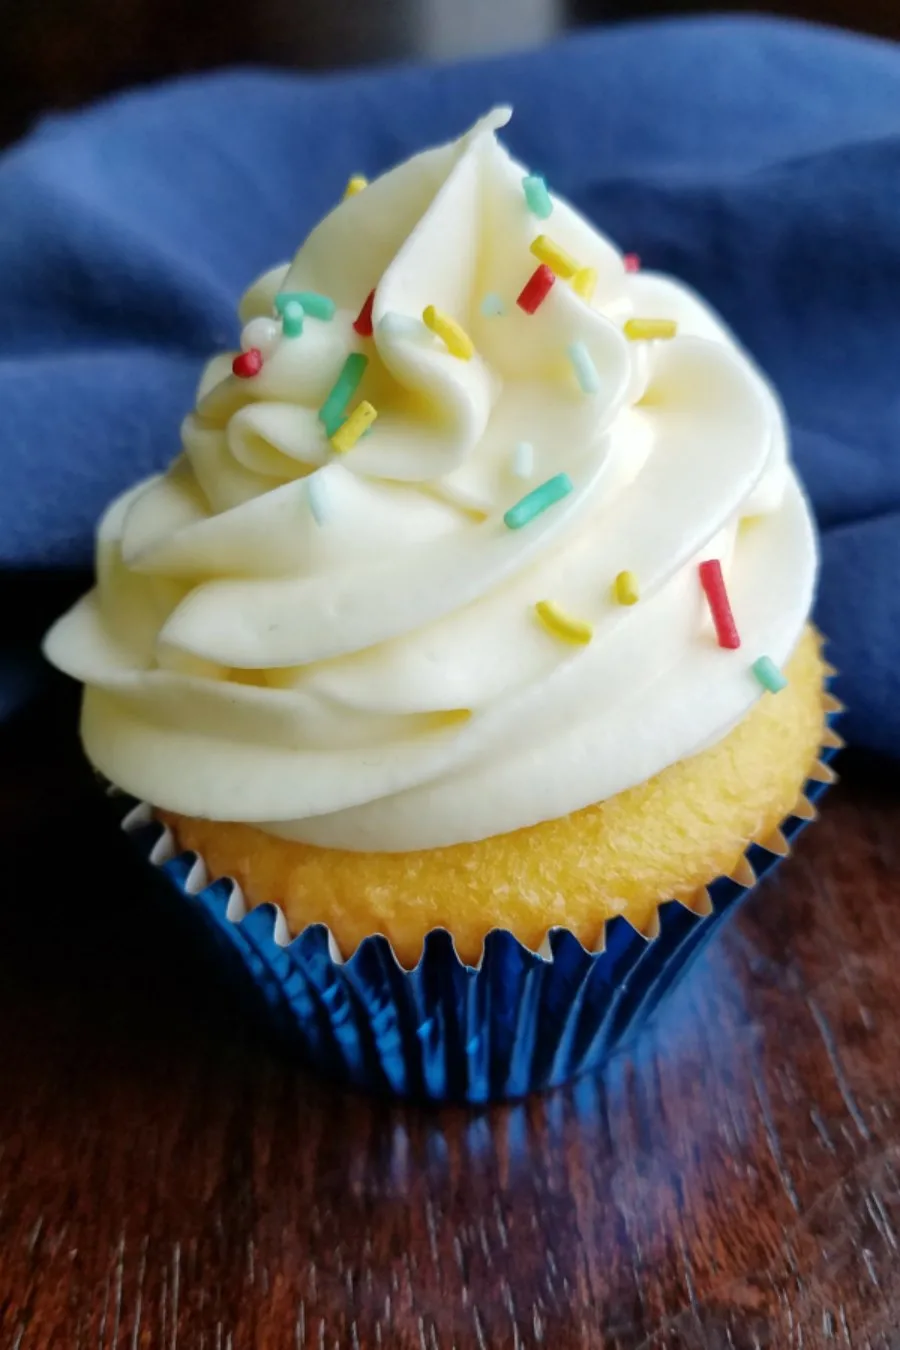 Cupcake topped with tall swirl of lemonade Russian buttercream and colorful sprinkles.